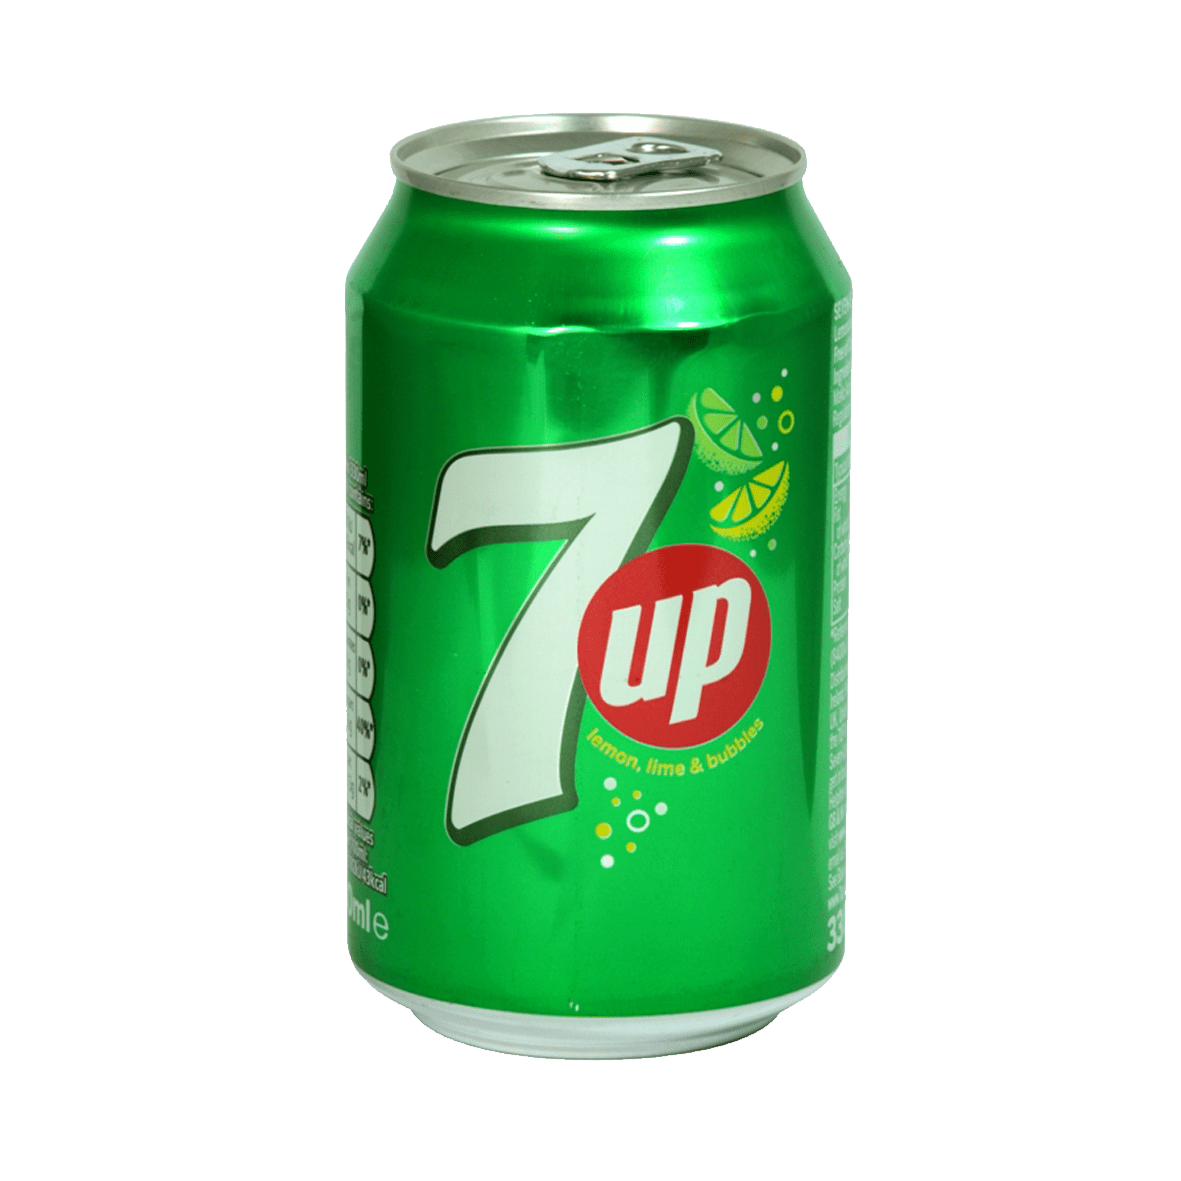 7up Can Png File.